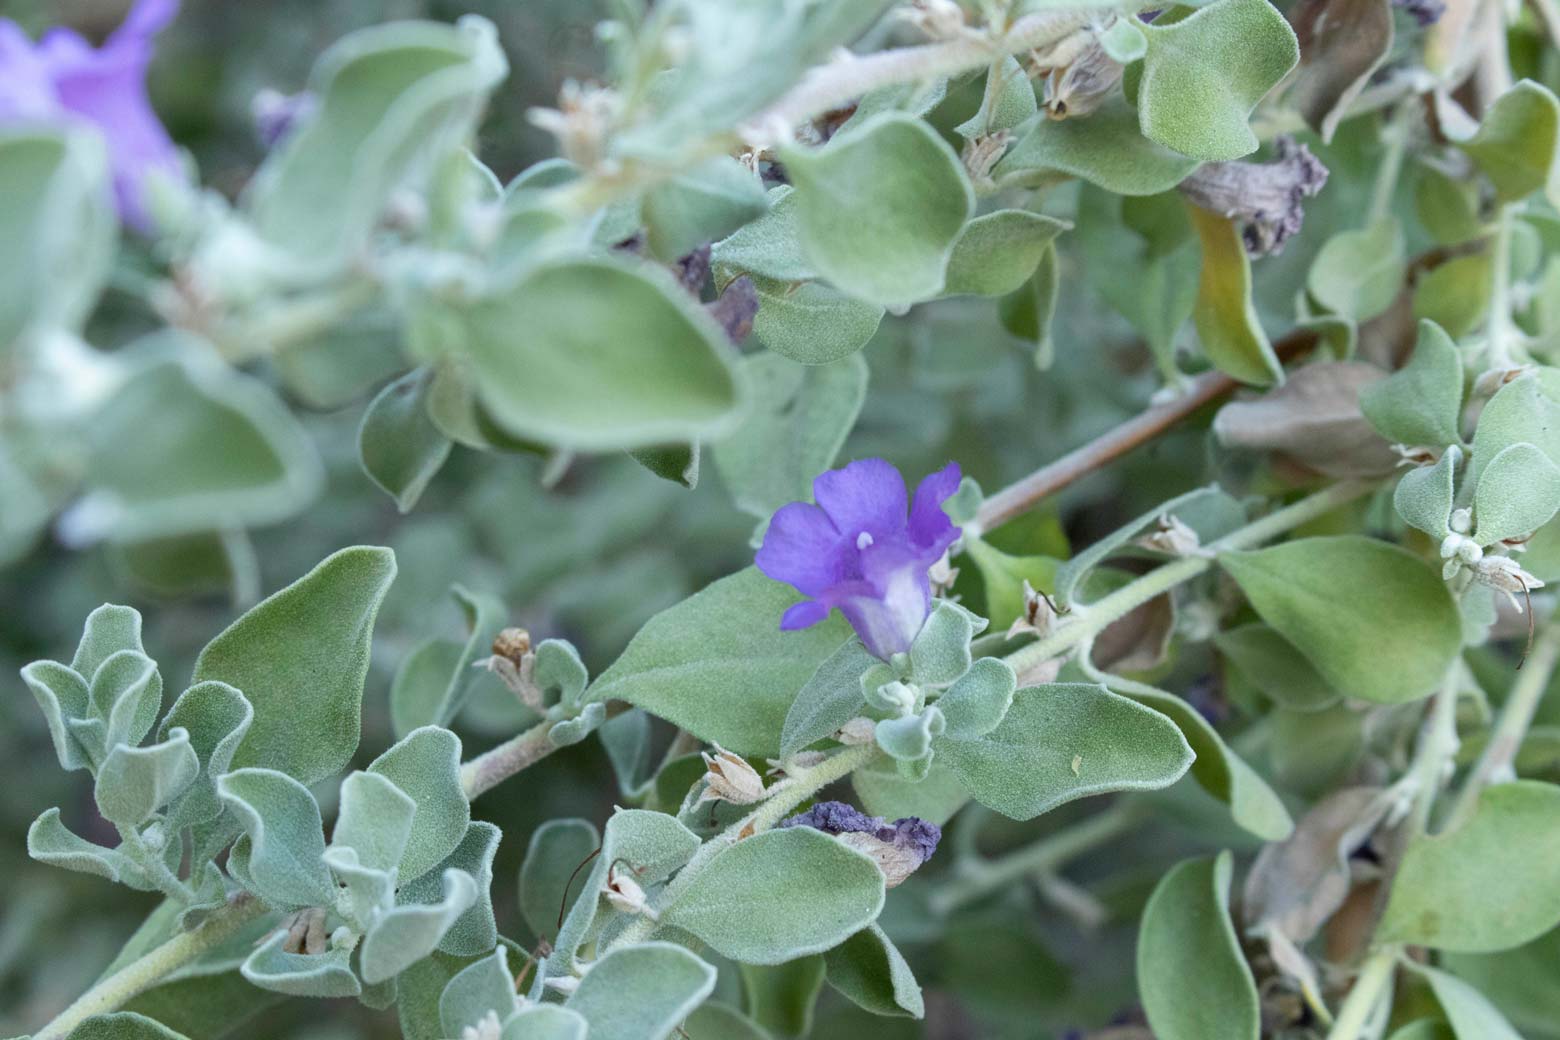 A close-up of the leaves and flowers of a Leucophyllum plant.